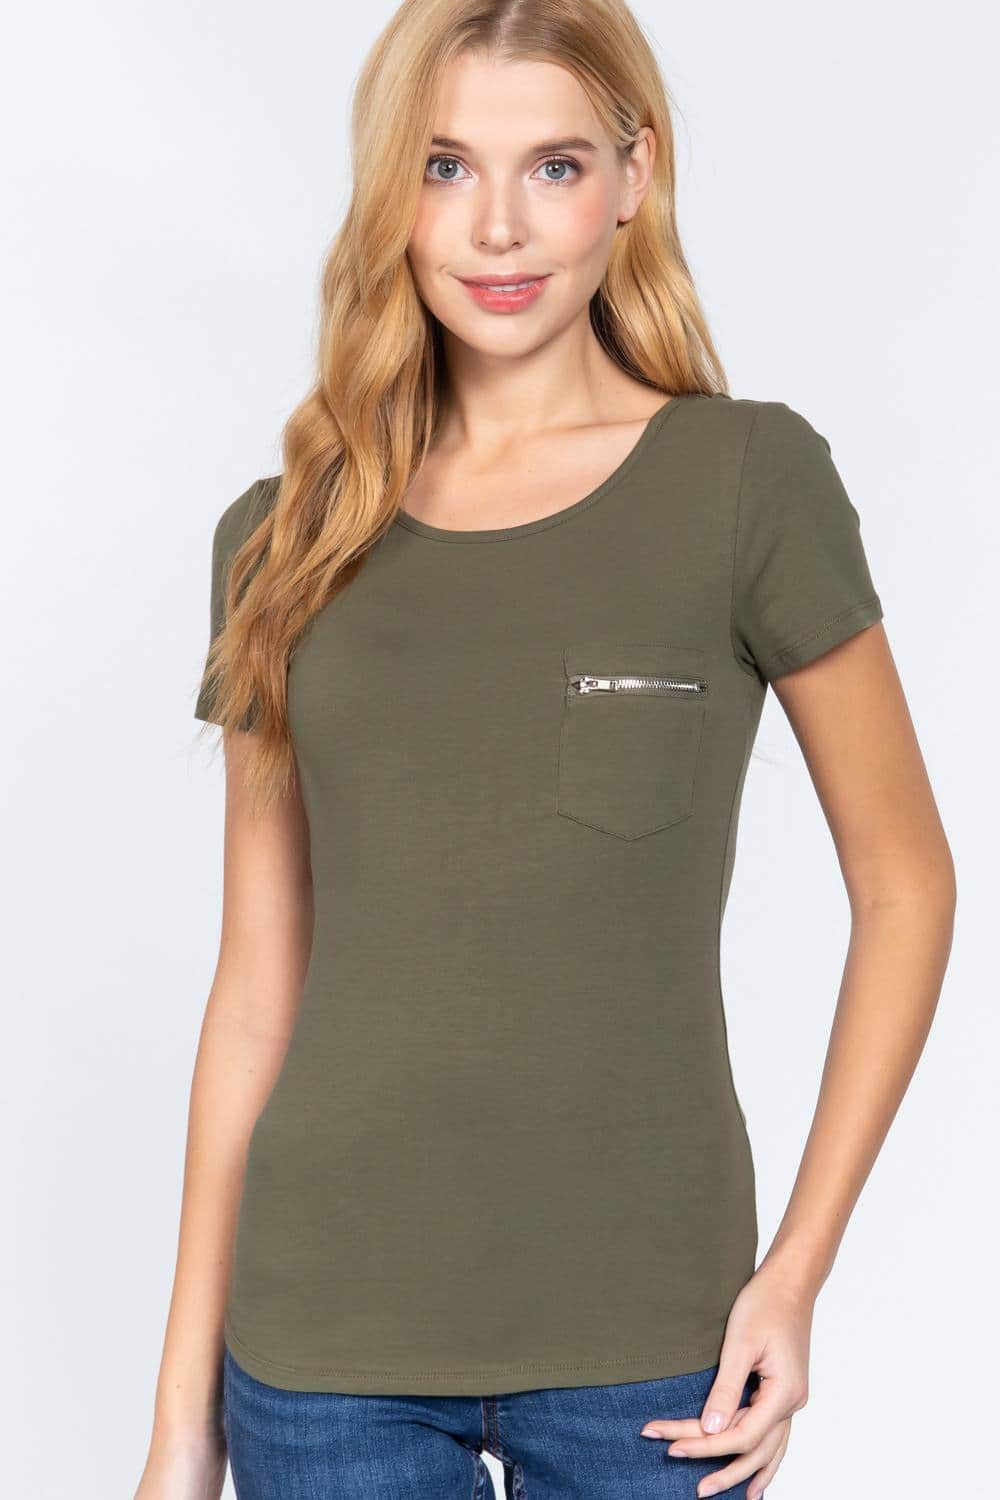 Short Sleeve Top With Zipper Pocket-TOPS / DRESSES-[Adult]-[Female]-Olive Green-S-Blue Zone Planet